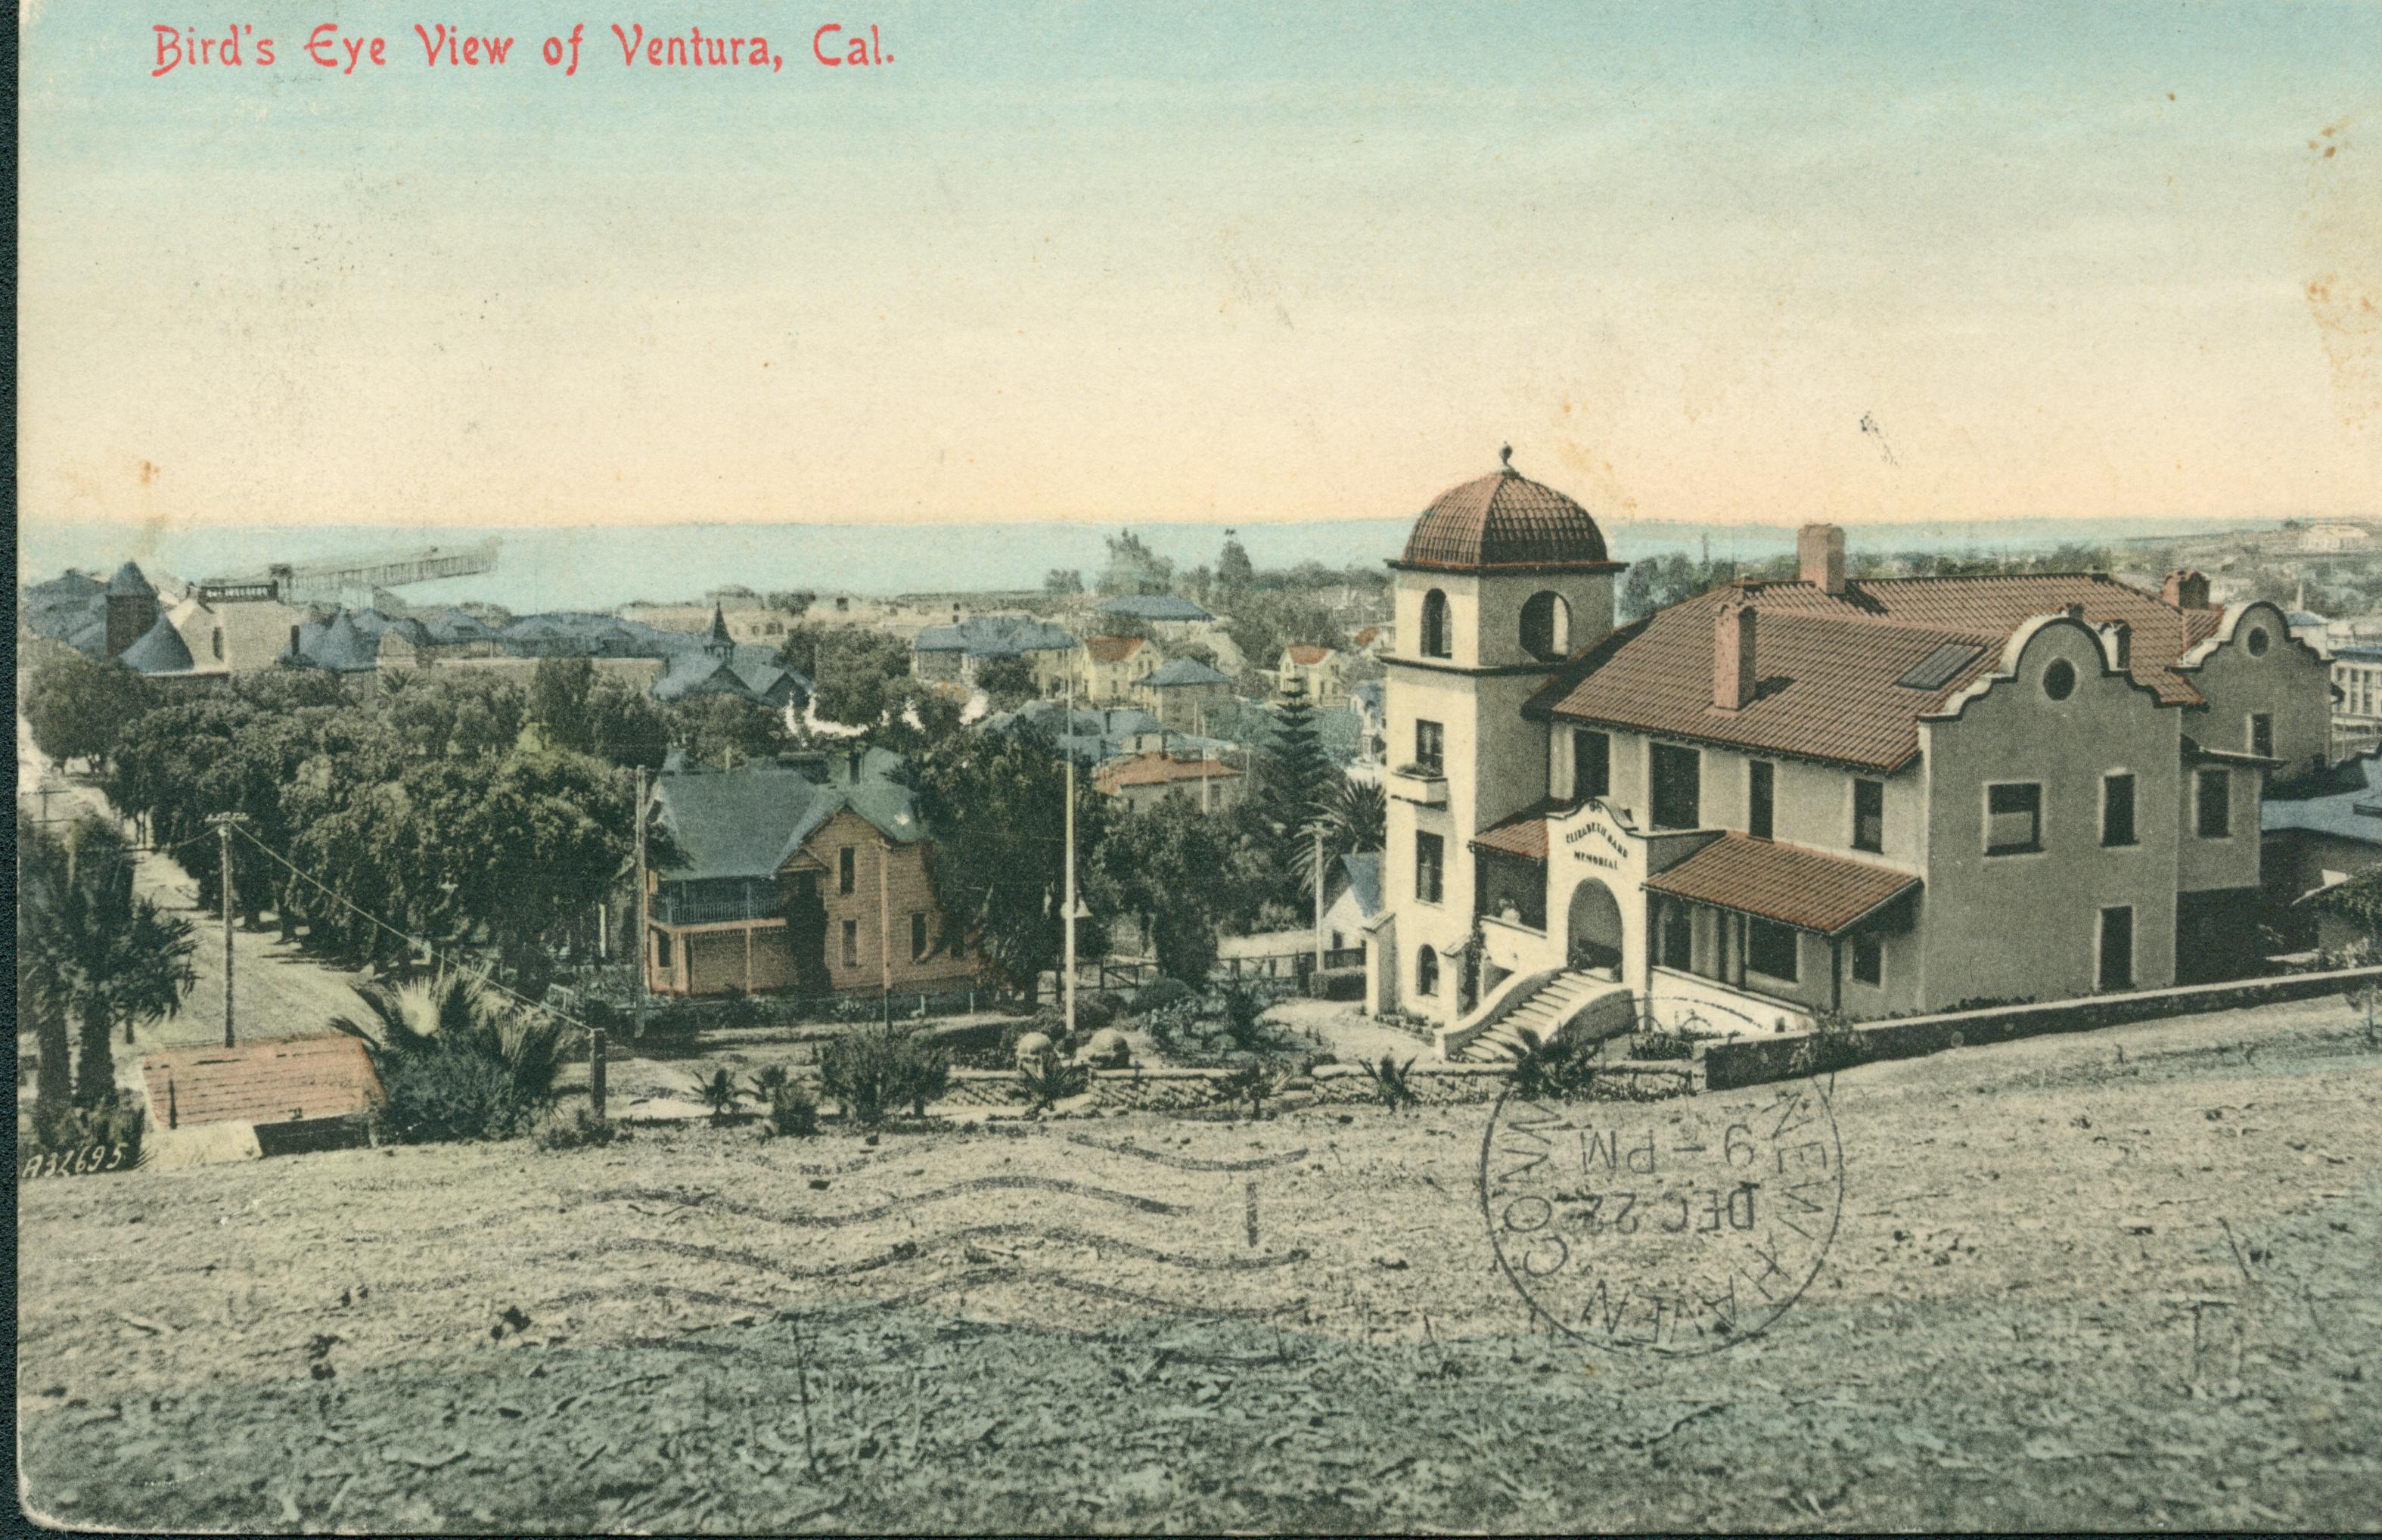 Hillside view of Ventura with ocean in the background